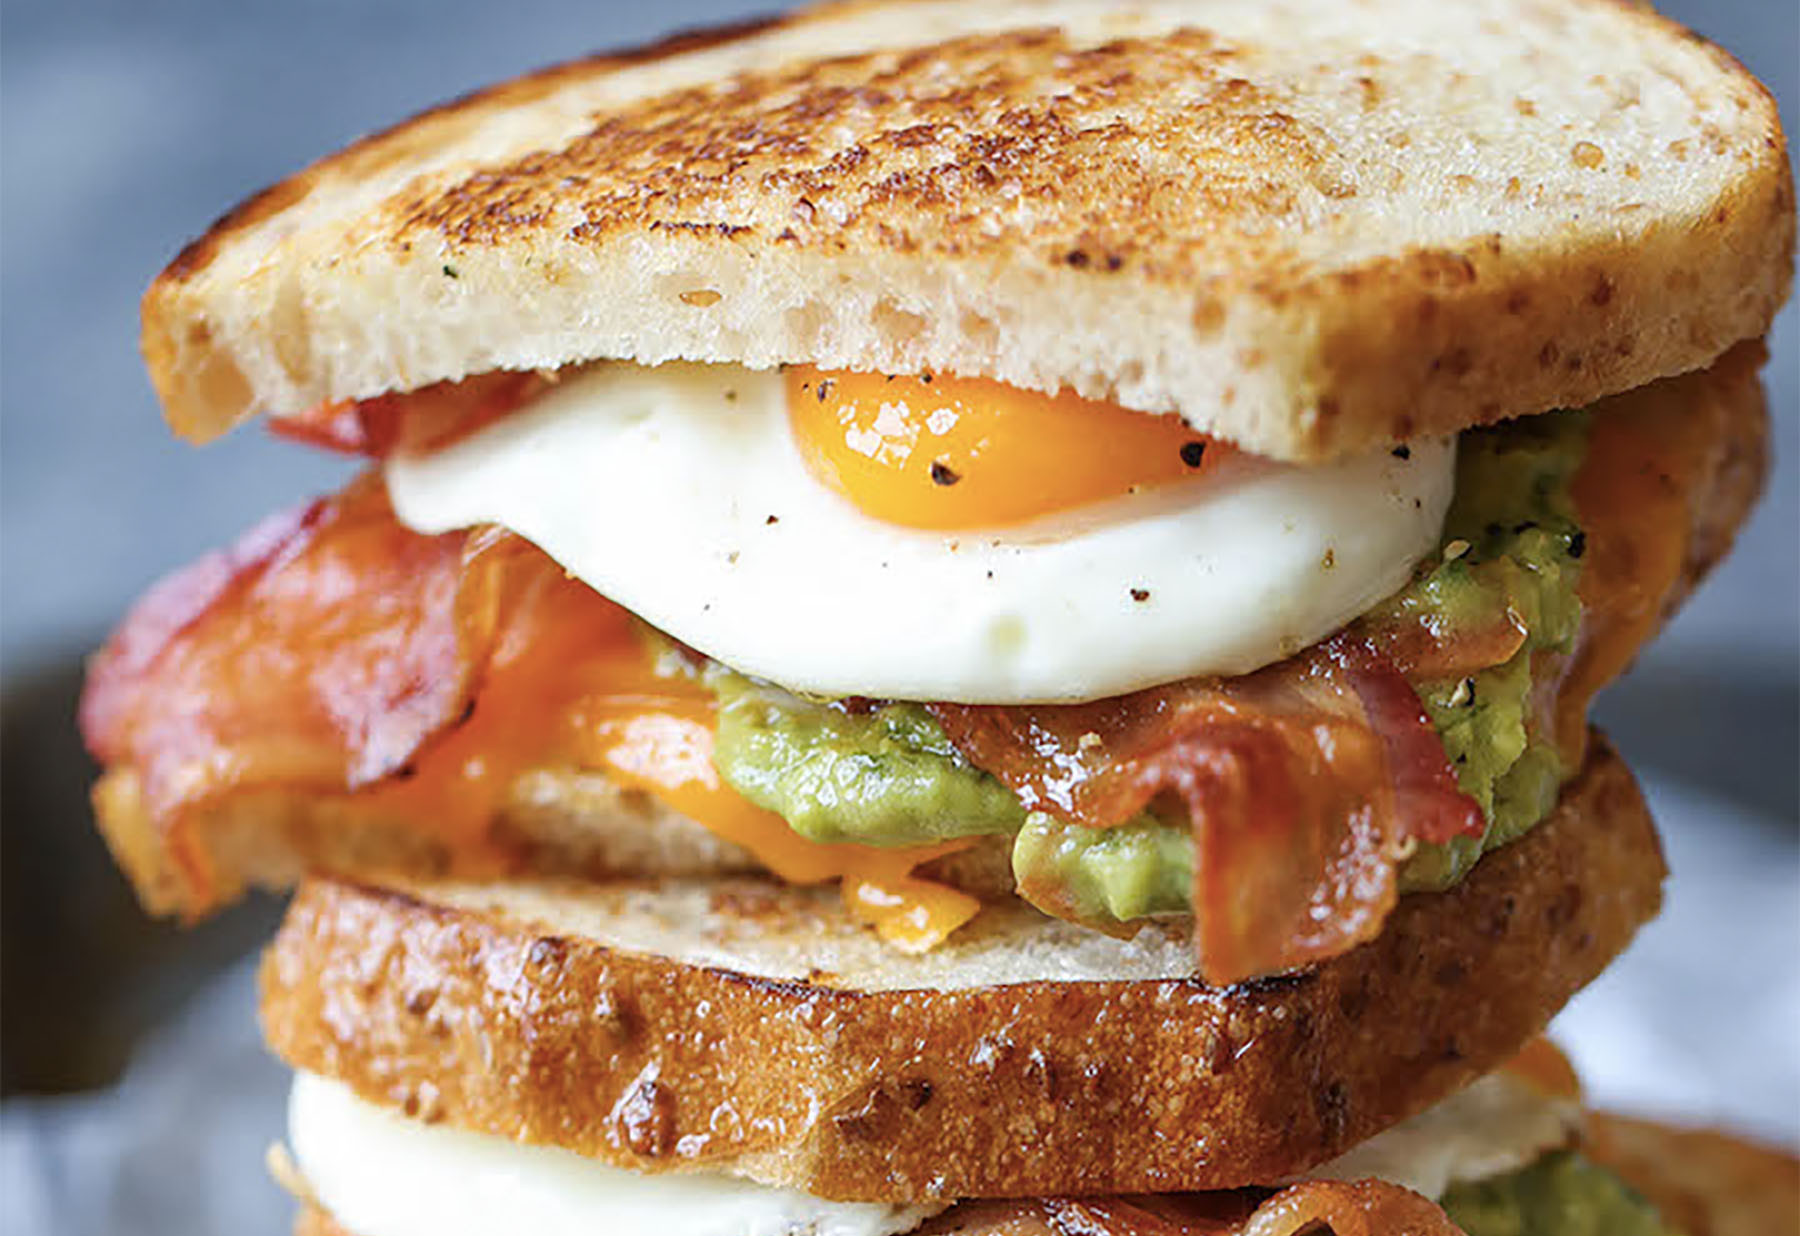 Breakfast Sandwich Recipes
 10 Easy Breakfasts That You Can Make Ahead of Time The